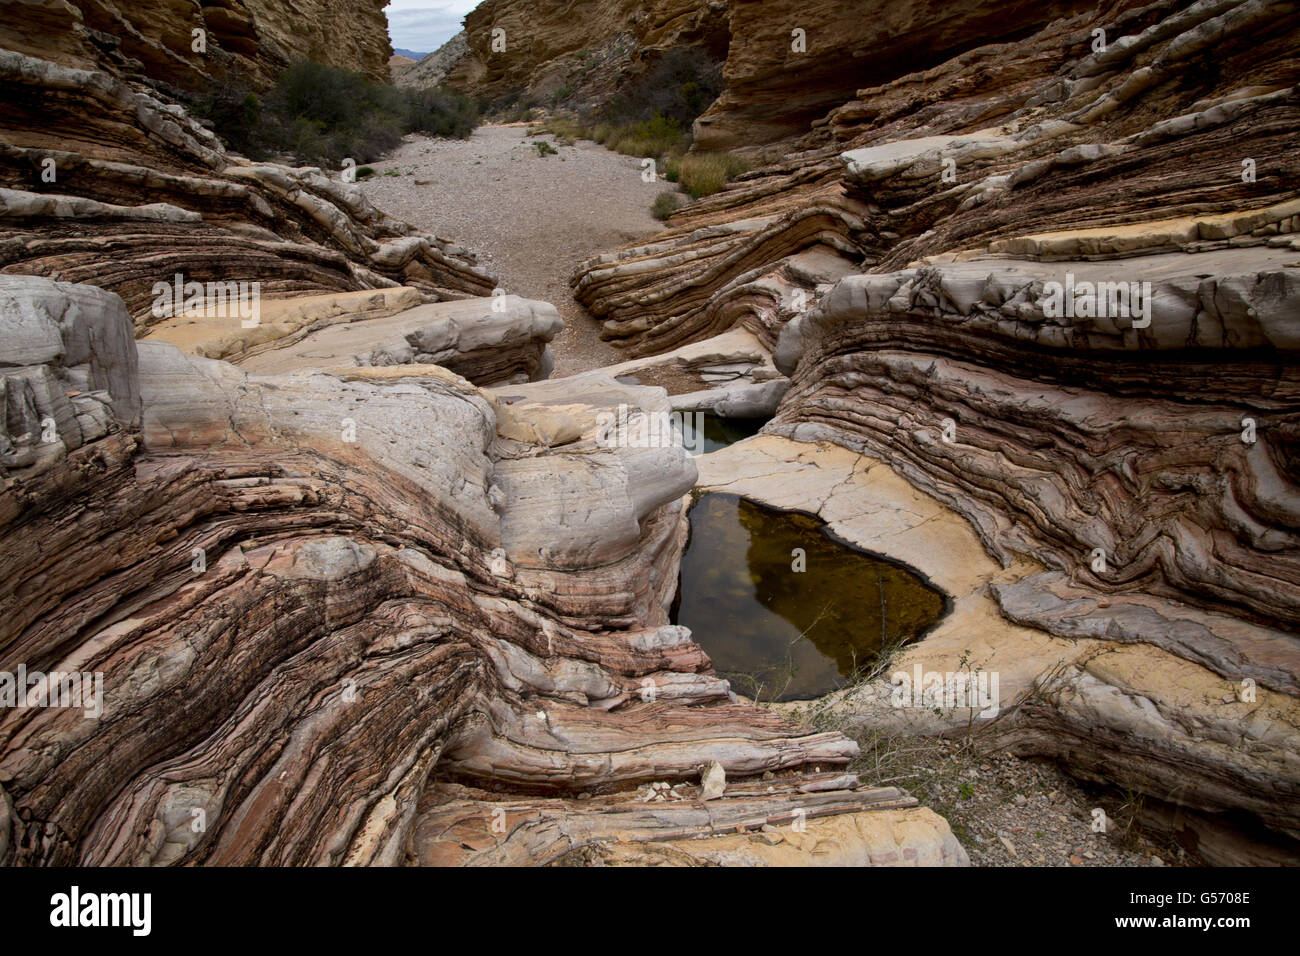 Rock strata and canyon with water in eroded depression on bedrock, Ernst Tinaja, Big Bend N.P., Chihuahuan Desert, Texas, U.S.A., February Stock Photo